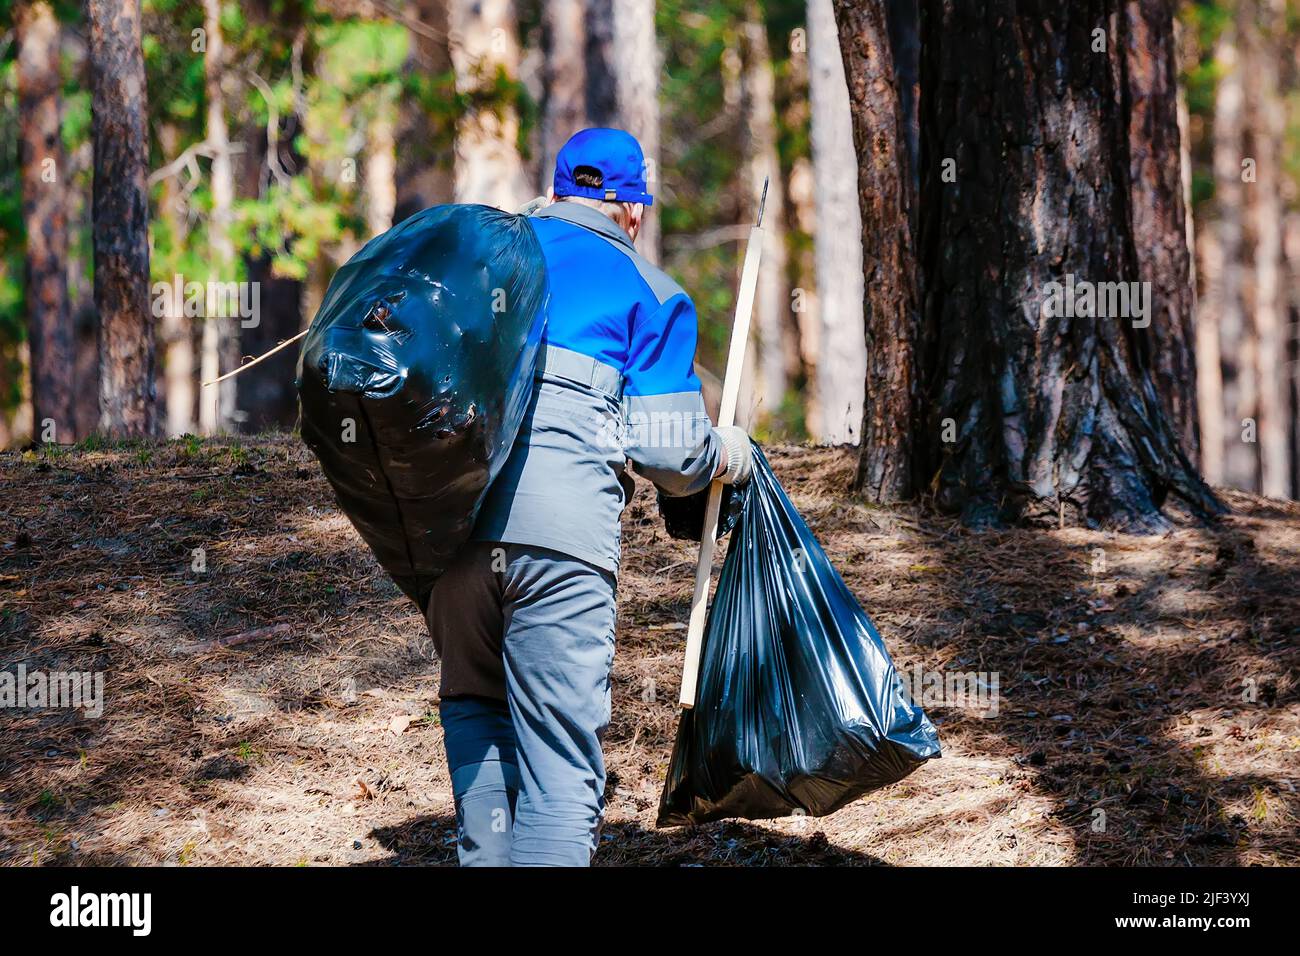 Volunteer collects garbage in forest in large plastic bags on summer day. Man in overalls carries bag of garbage on his shoulder. Rear view. Cleaning of forests from pollution and household waste. Real scene. Stock Photo